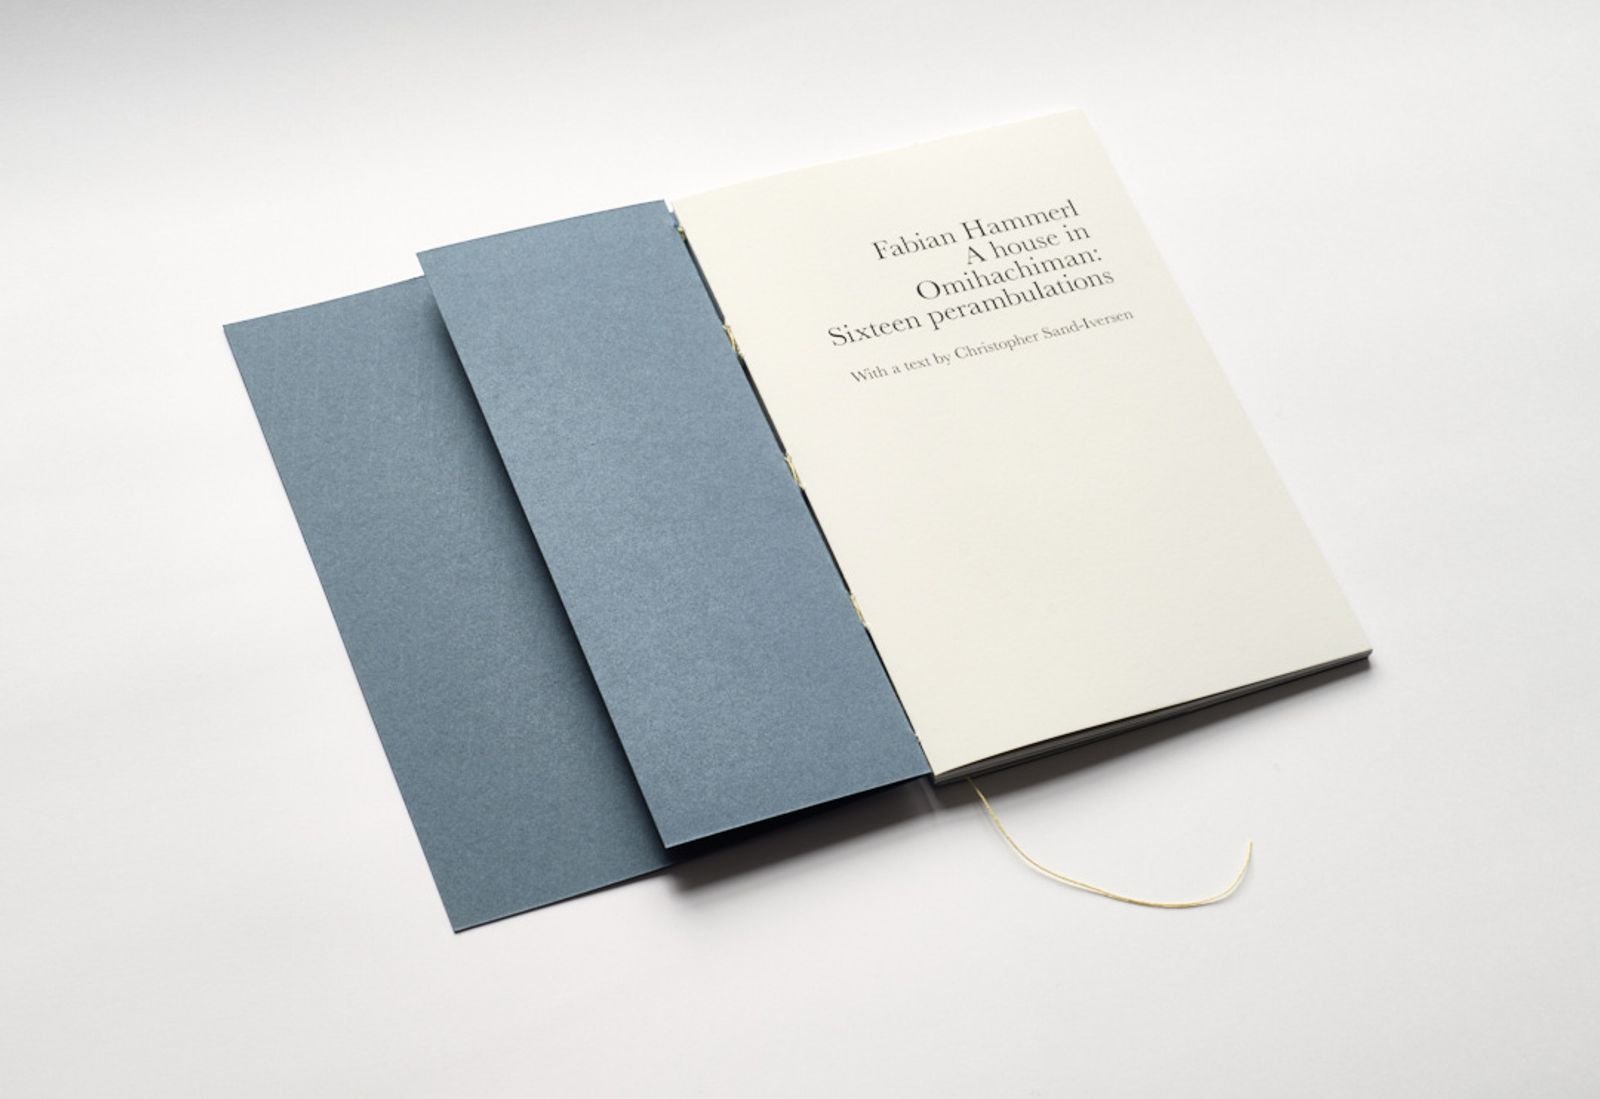 © Fabian Hammerl - The limited edition self-published artist book containing the series.